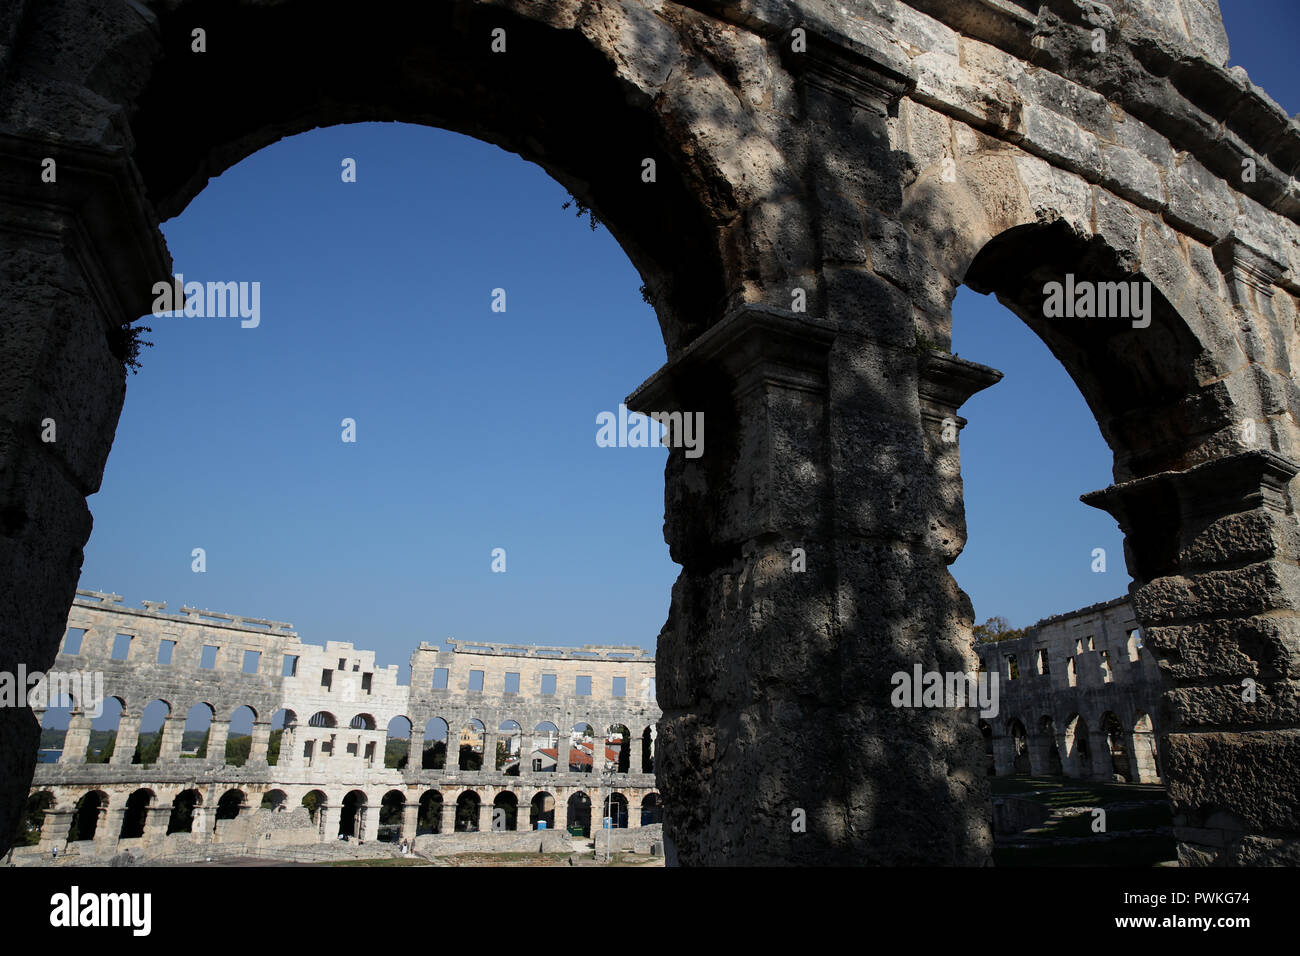 A general view of a Roman Amphitheater known as 'The Arena' in Pula, Croatia Stock Photo